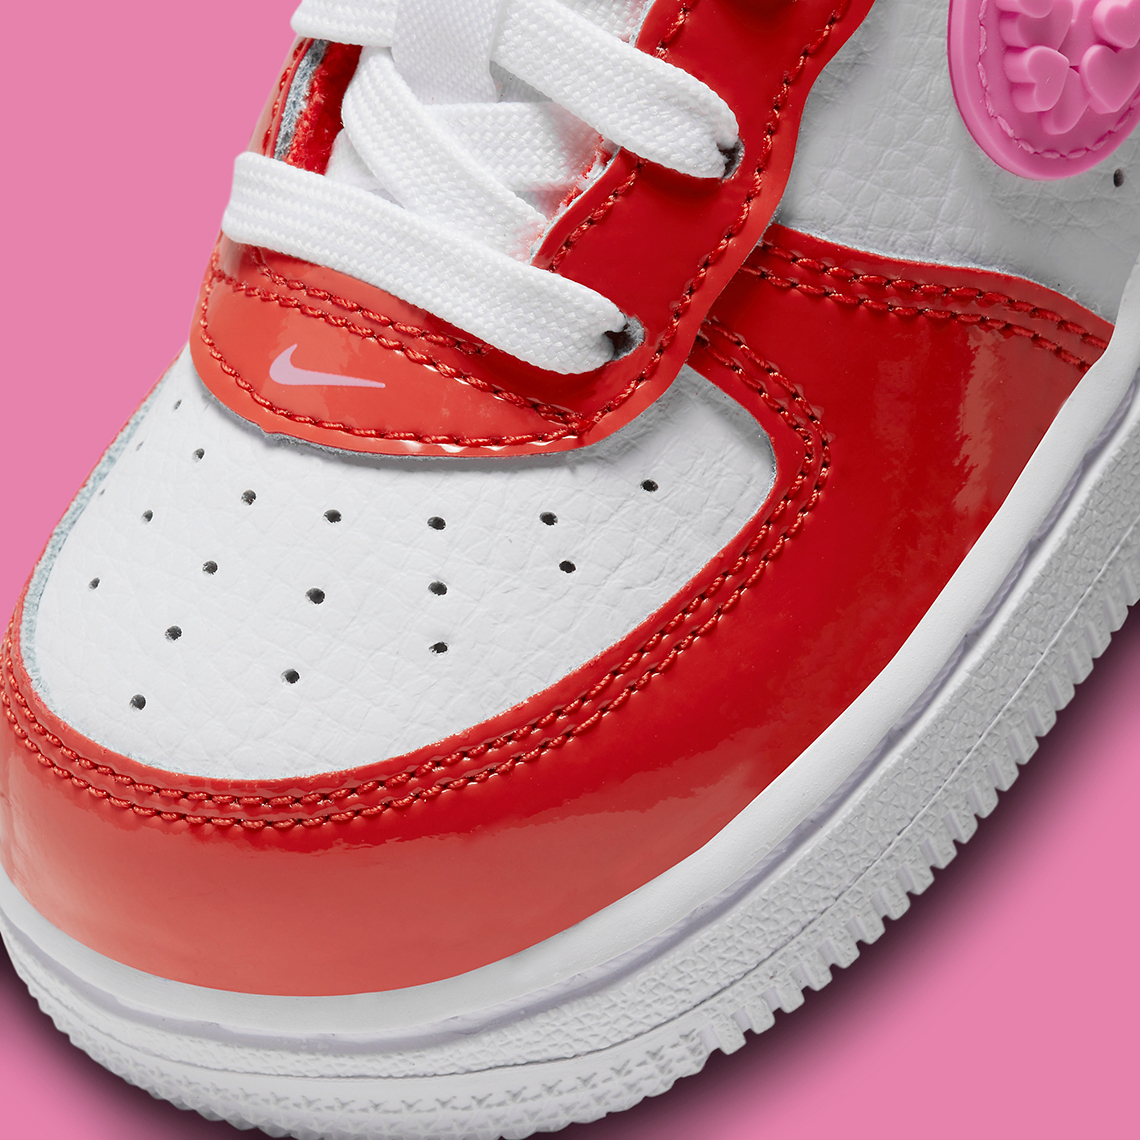 Nike Air Force 1 Low TD Valentines Day FD1033 600 7